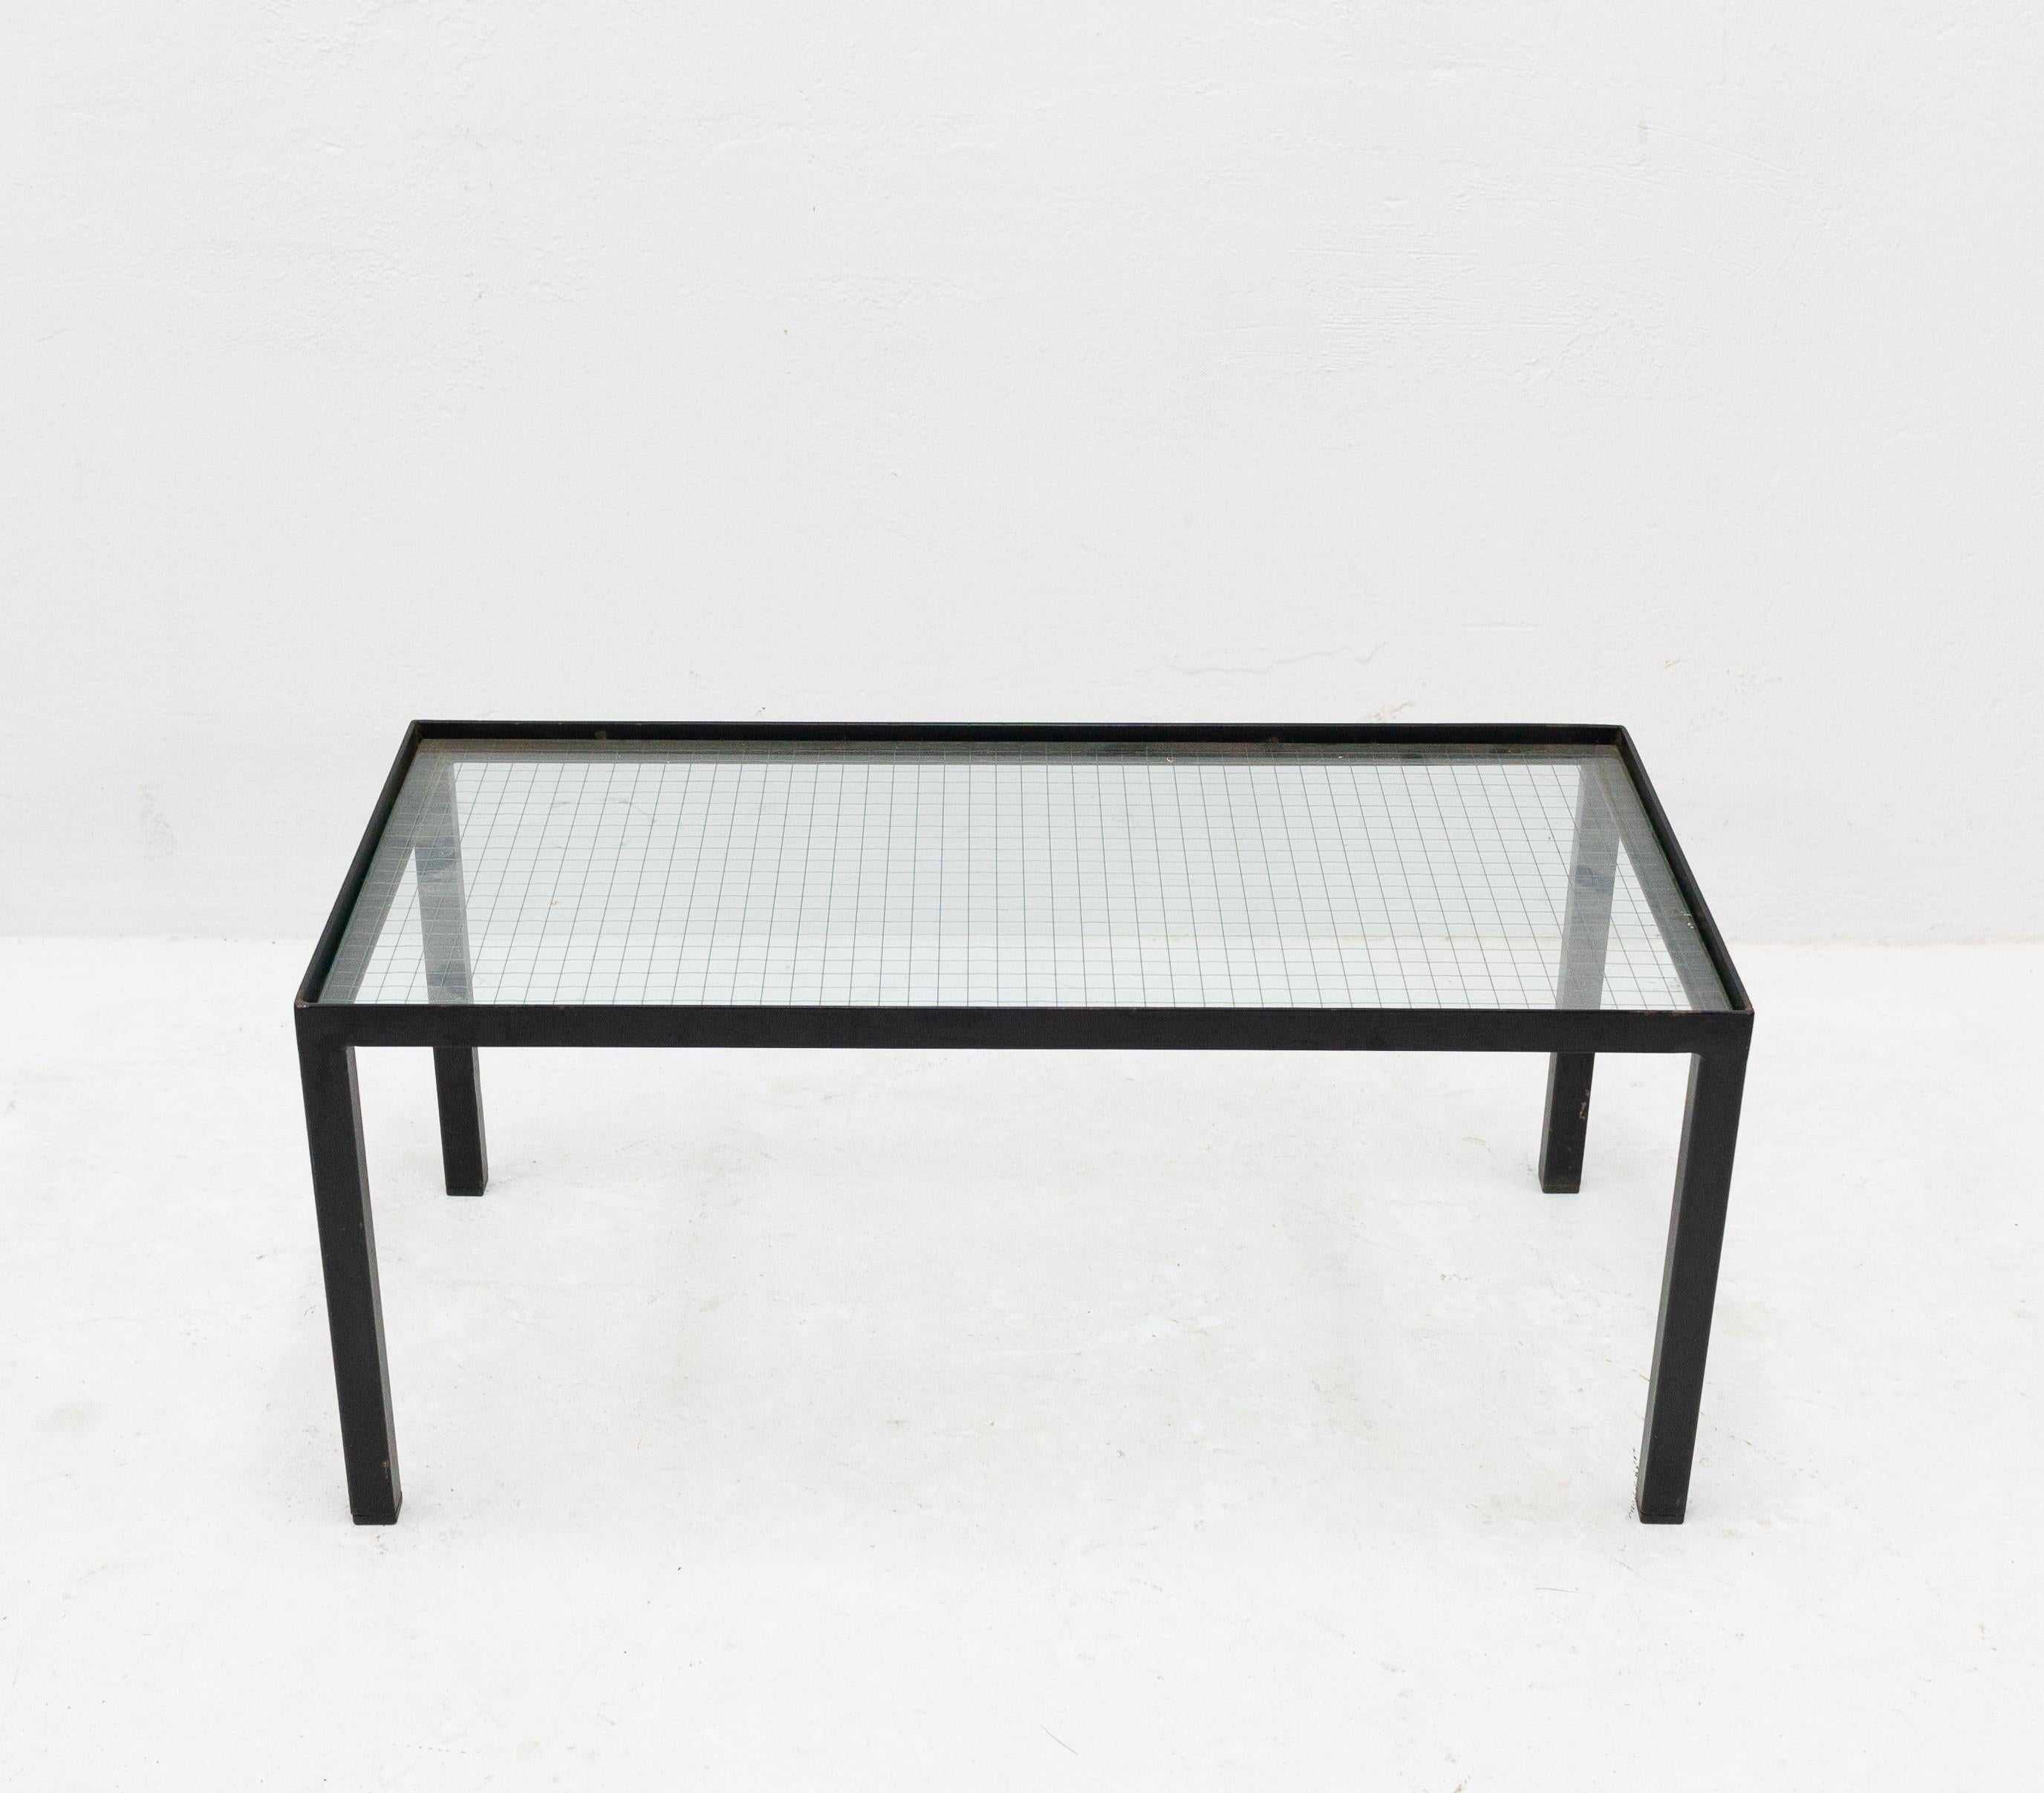 1950s metal side table. Rectangular metal frame with the original wire glass top surface. Very simple design.
Dutch.